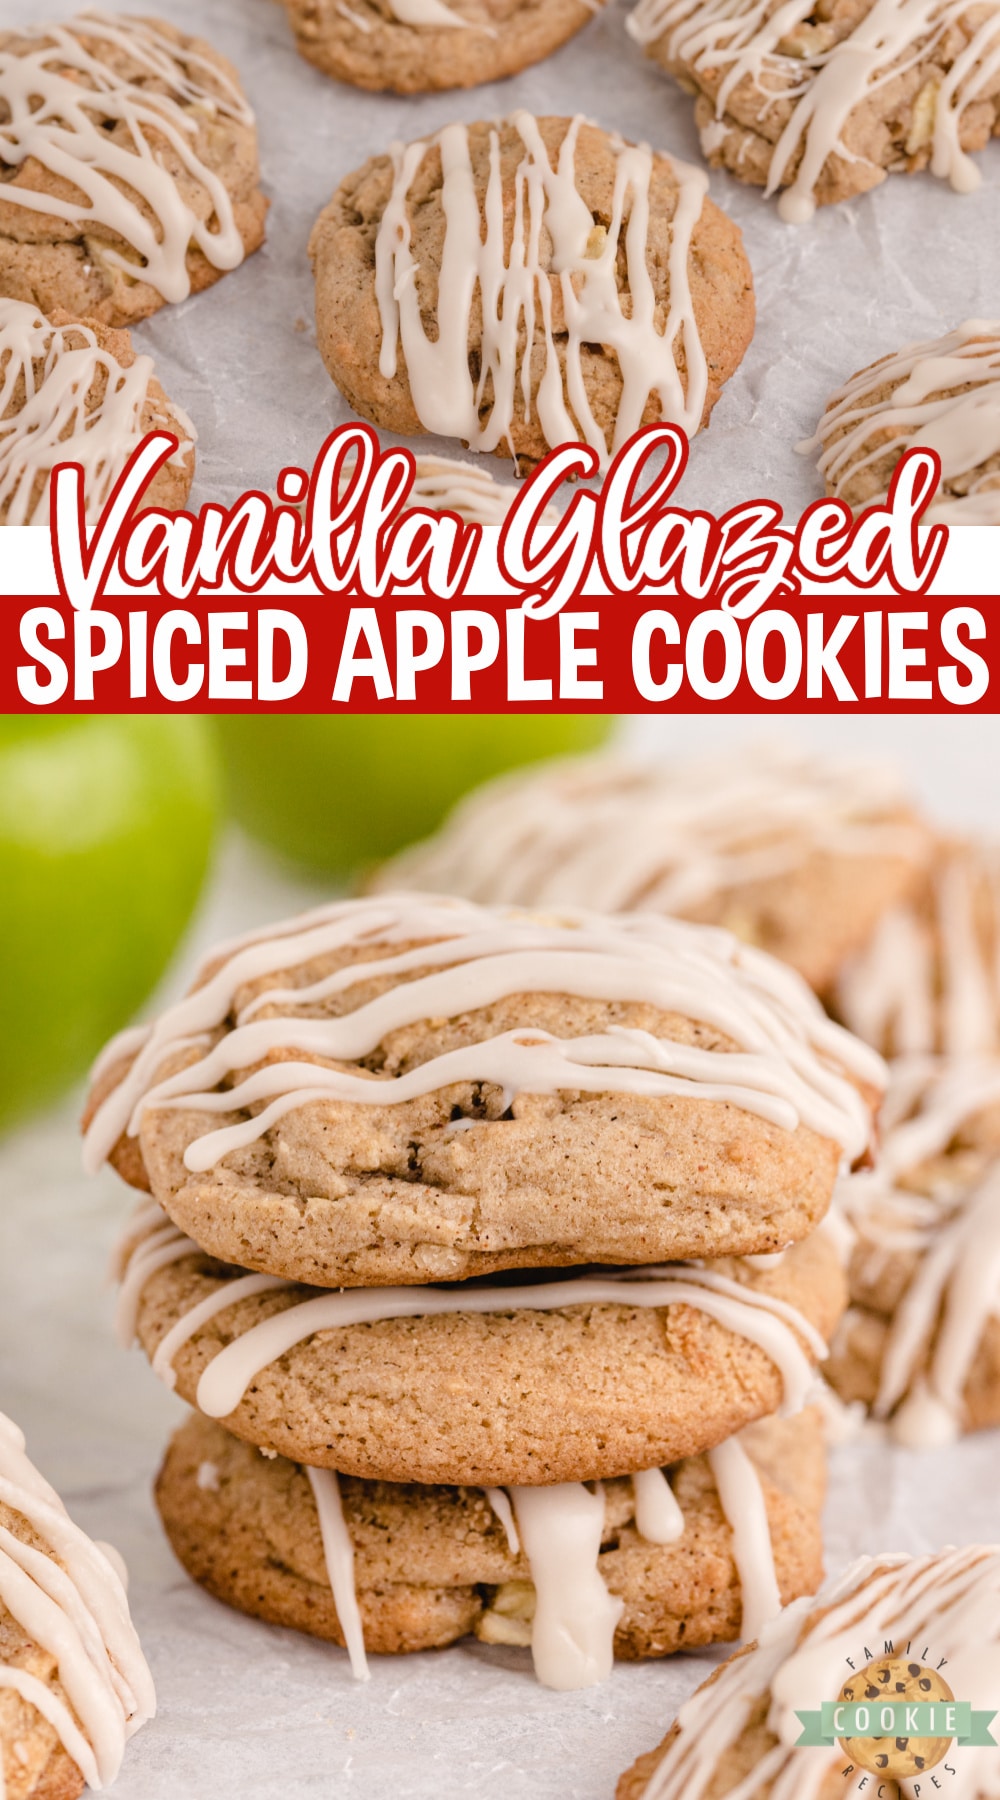 Vanilla Glazed Spiced Apple Cookies made with lots of spices, fresh apples and walnuts. Soft and chewy cookie recipe that is topped with a simple vanilla glaze.